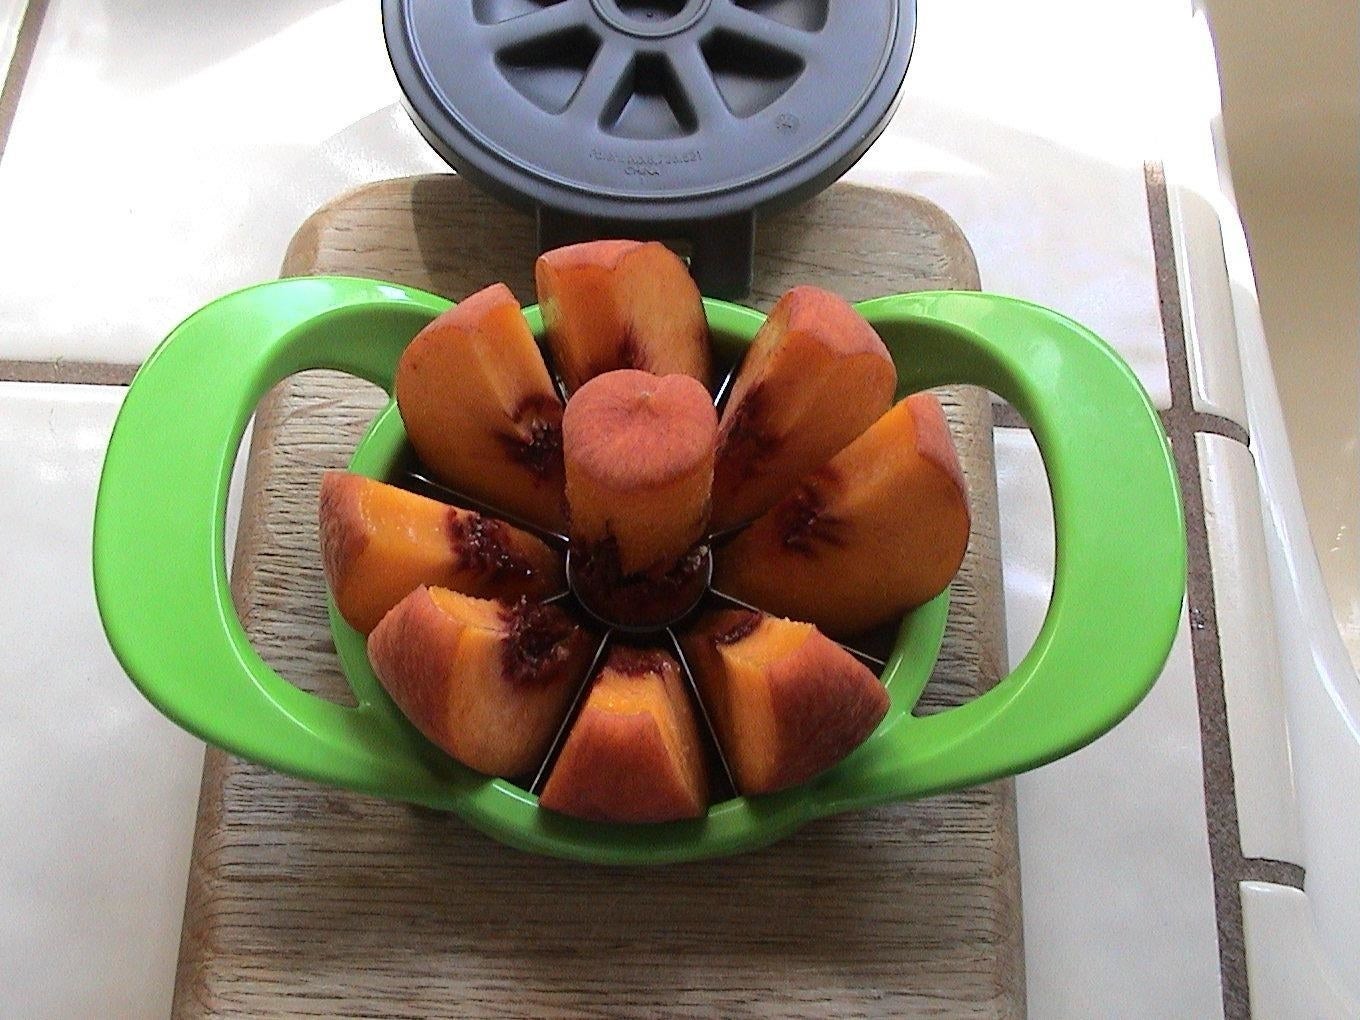 Reviewer apple slicer in use on peach